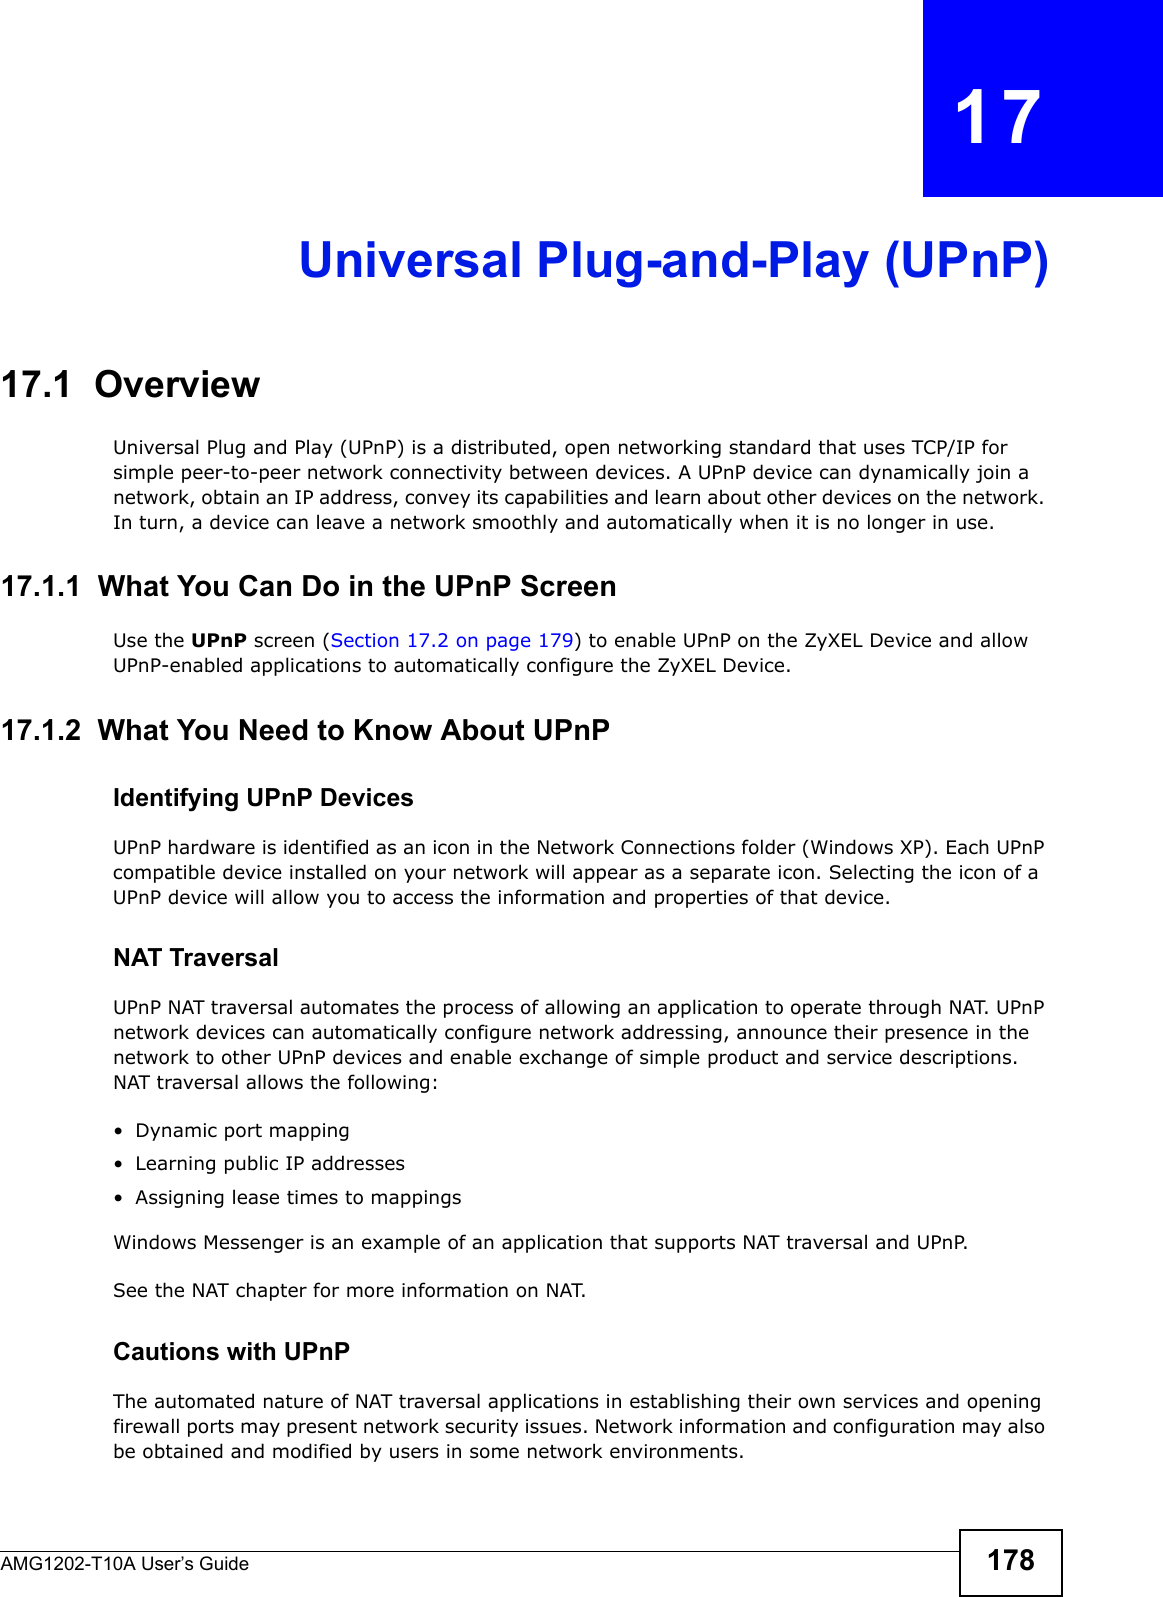 AMG1202-T10A User’s Guide 178CHAPTER   17Universal Plug-and-Play (UPnP)17.1  OverviewUniversal Plug and Play (UPnP) is a distributed, open networking standard that uses TCP/IP for simple peer-to-peer network connectivity between devices. A UPnP device can dynamically join a network, obtain an IP address, convey its capabilities and learn about other devices on the network. In turn, a device can leave a network smoothly and automatically when it is no longer in use.17.1.1  What You Can Do in the UPnP ScreenUse the UPnP screen (Section 17.2 on page 179) to enable UPnP on the ZyXEL Device and allow UPnP-enabled applications to automatically configure the ZyXEL Device.17.1.2  What You Need to Know About UPnPIdentifying UPnP DevicesUPnP hardware is identified as an icon in the Network Connections folder (Windows XP). Each UPnP compatible device installed on your network will appear as a separate icon. Selecting the icon of a UPnP device will allow you to access the information and properties of that device. NAT TraversalUPnP NAT traversal automates the process of allowing an application to operate through NAT. UPnP network devices can automatically configure network addressing, announce their presence in the network to other UPnP devices and enable exchange of simple product and service descriptions. NAT traversal allows the following:• Dynamic port mapping• Learning public IP addresses• Assigning lease times to mappingsWindows Messenger is an example of an application that supports NAT traversal and UPnP. See the NAT chapter for more information on NAT.Cautions with UPnPThe automated nature of NAT traversal applications in establishing their own services and opening firewall ports may present network security issues. Network information and configuration may also be obtained and modified by users in some network environments. 